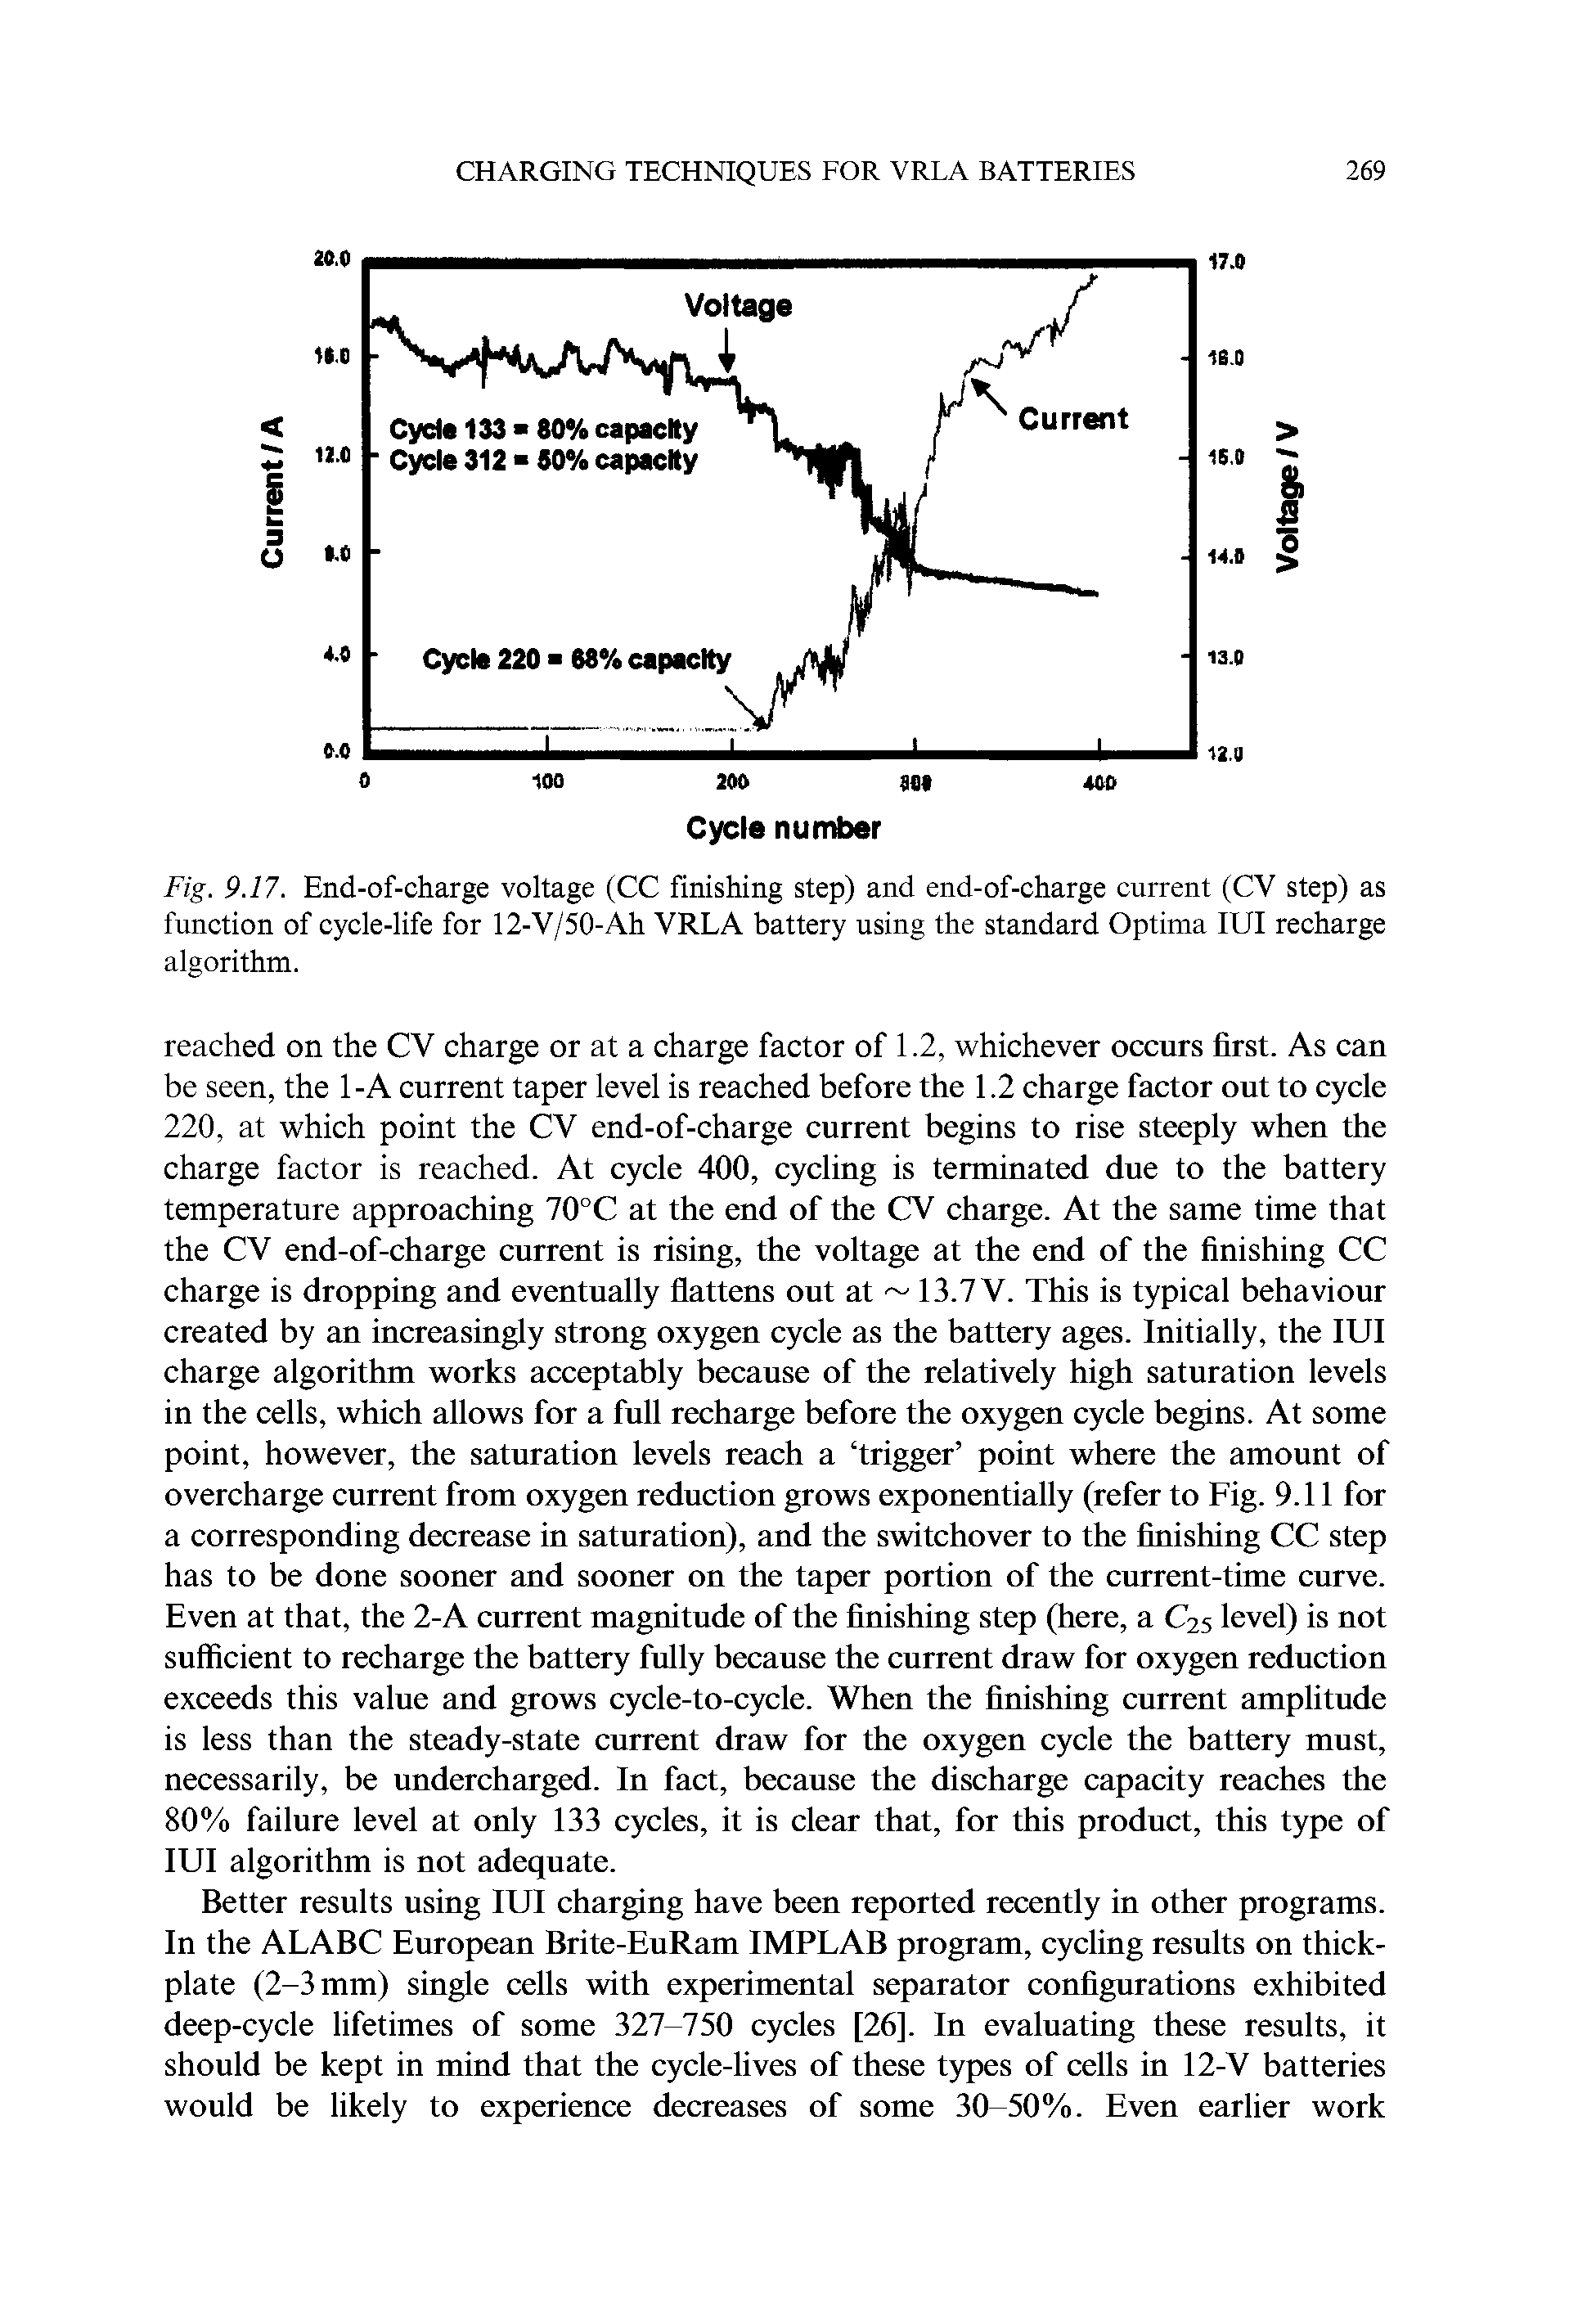 Fig. 9.17. End-of-charge voltage (CC finishing step) and end-of-charge current (CV step) as function of cycle-life for 12-V/50-Ah VRLA battery using the standard Optima lUI recharge algorithm.